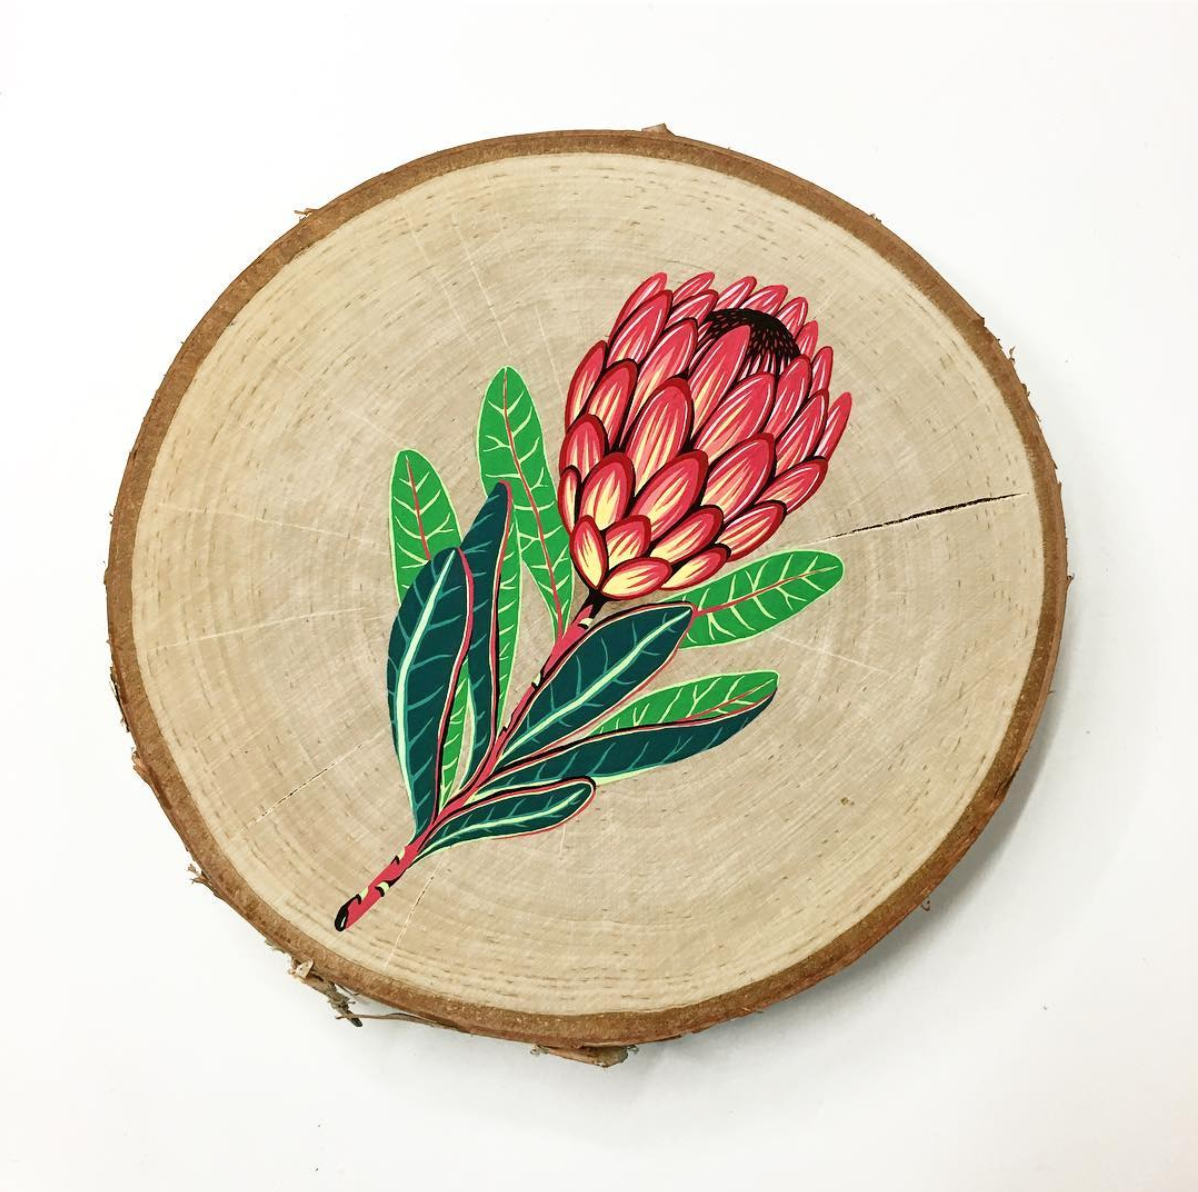 Painting done on wood of a flower